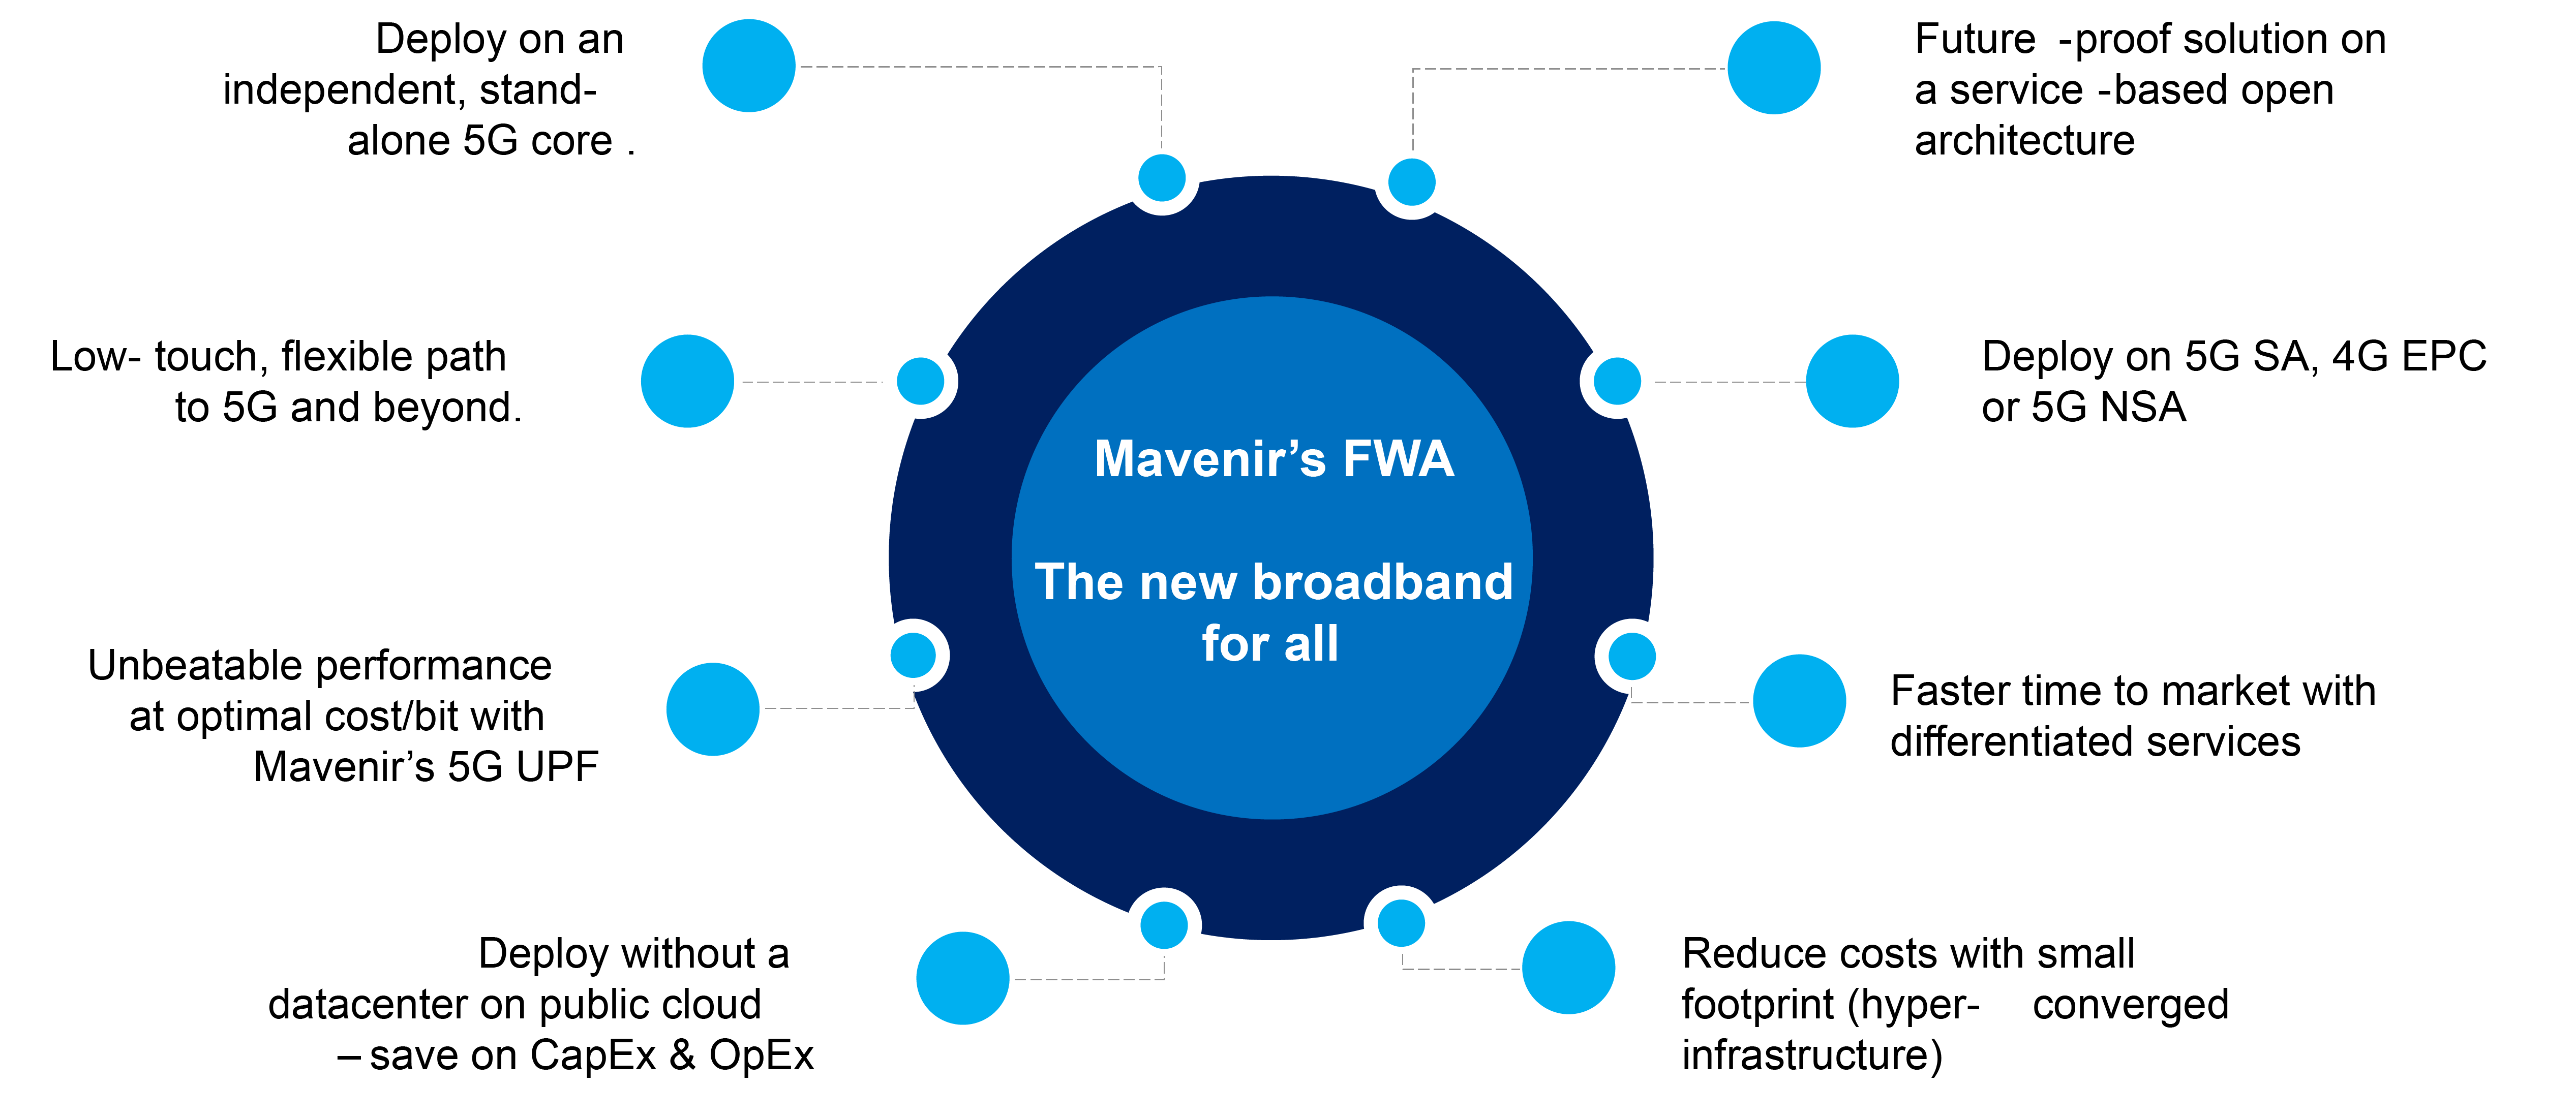 Fixed Wireless Access - Broadband for All